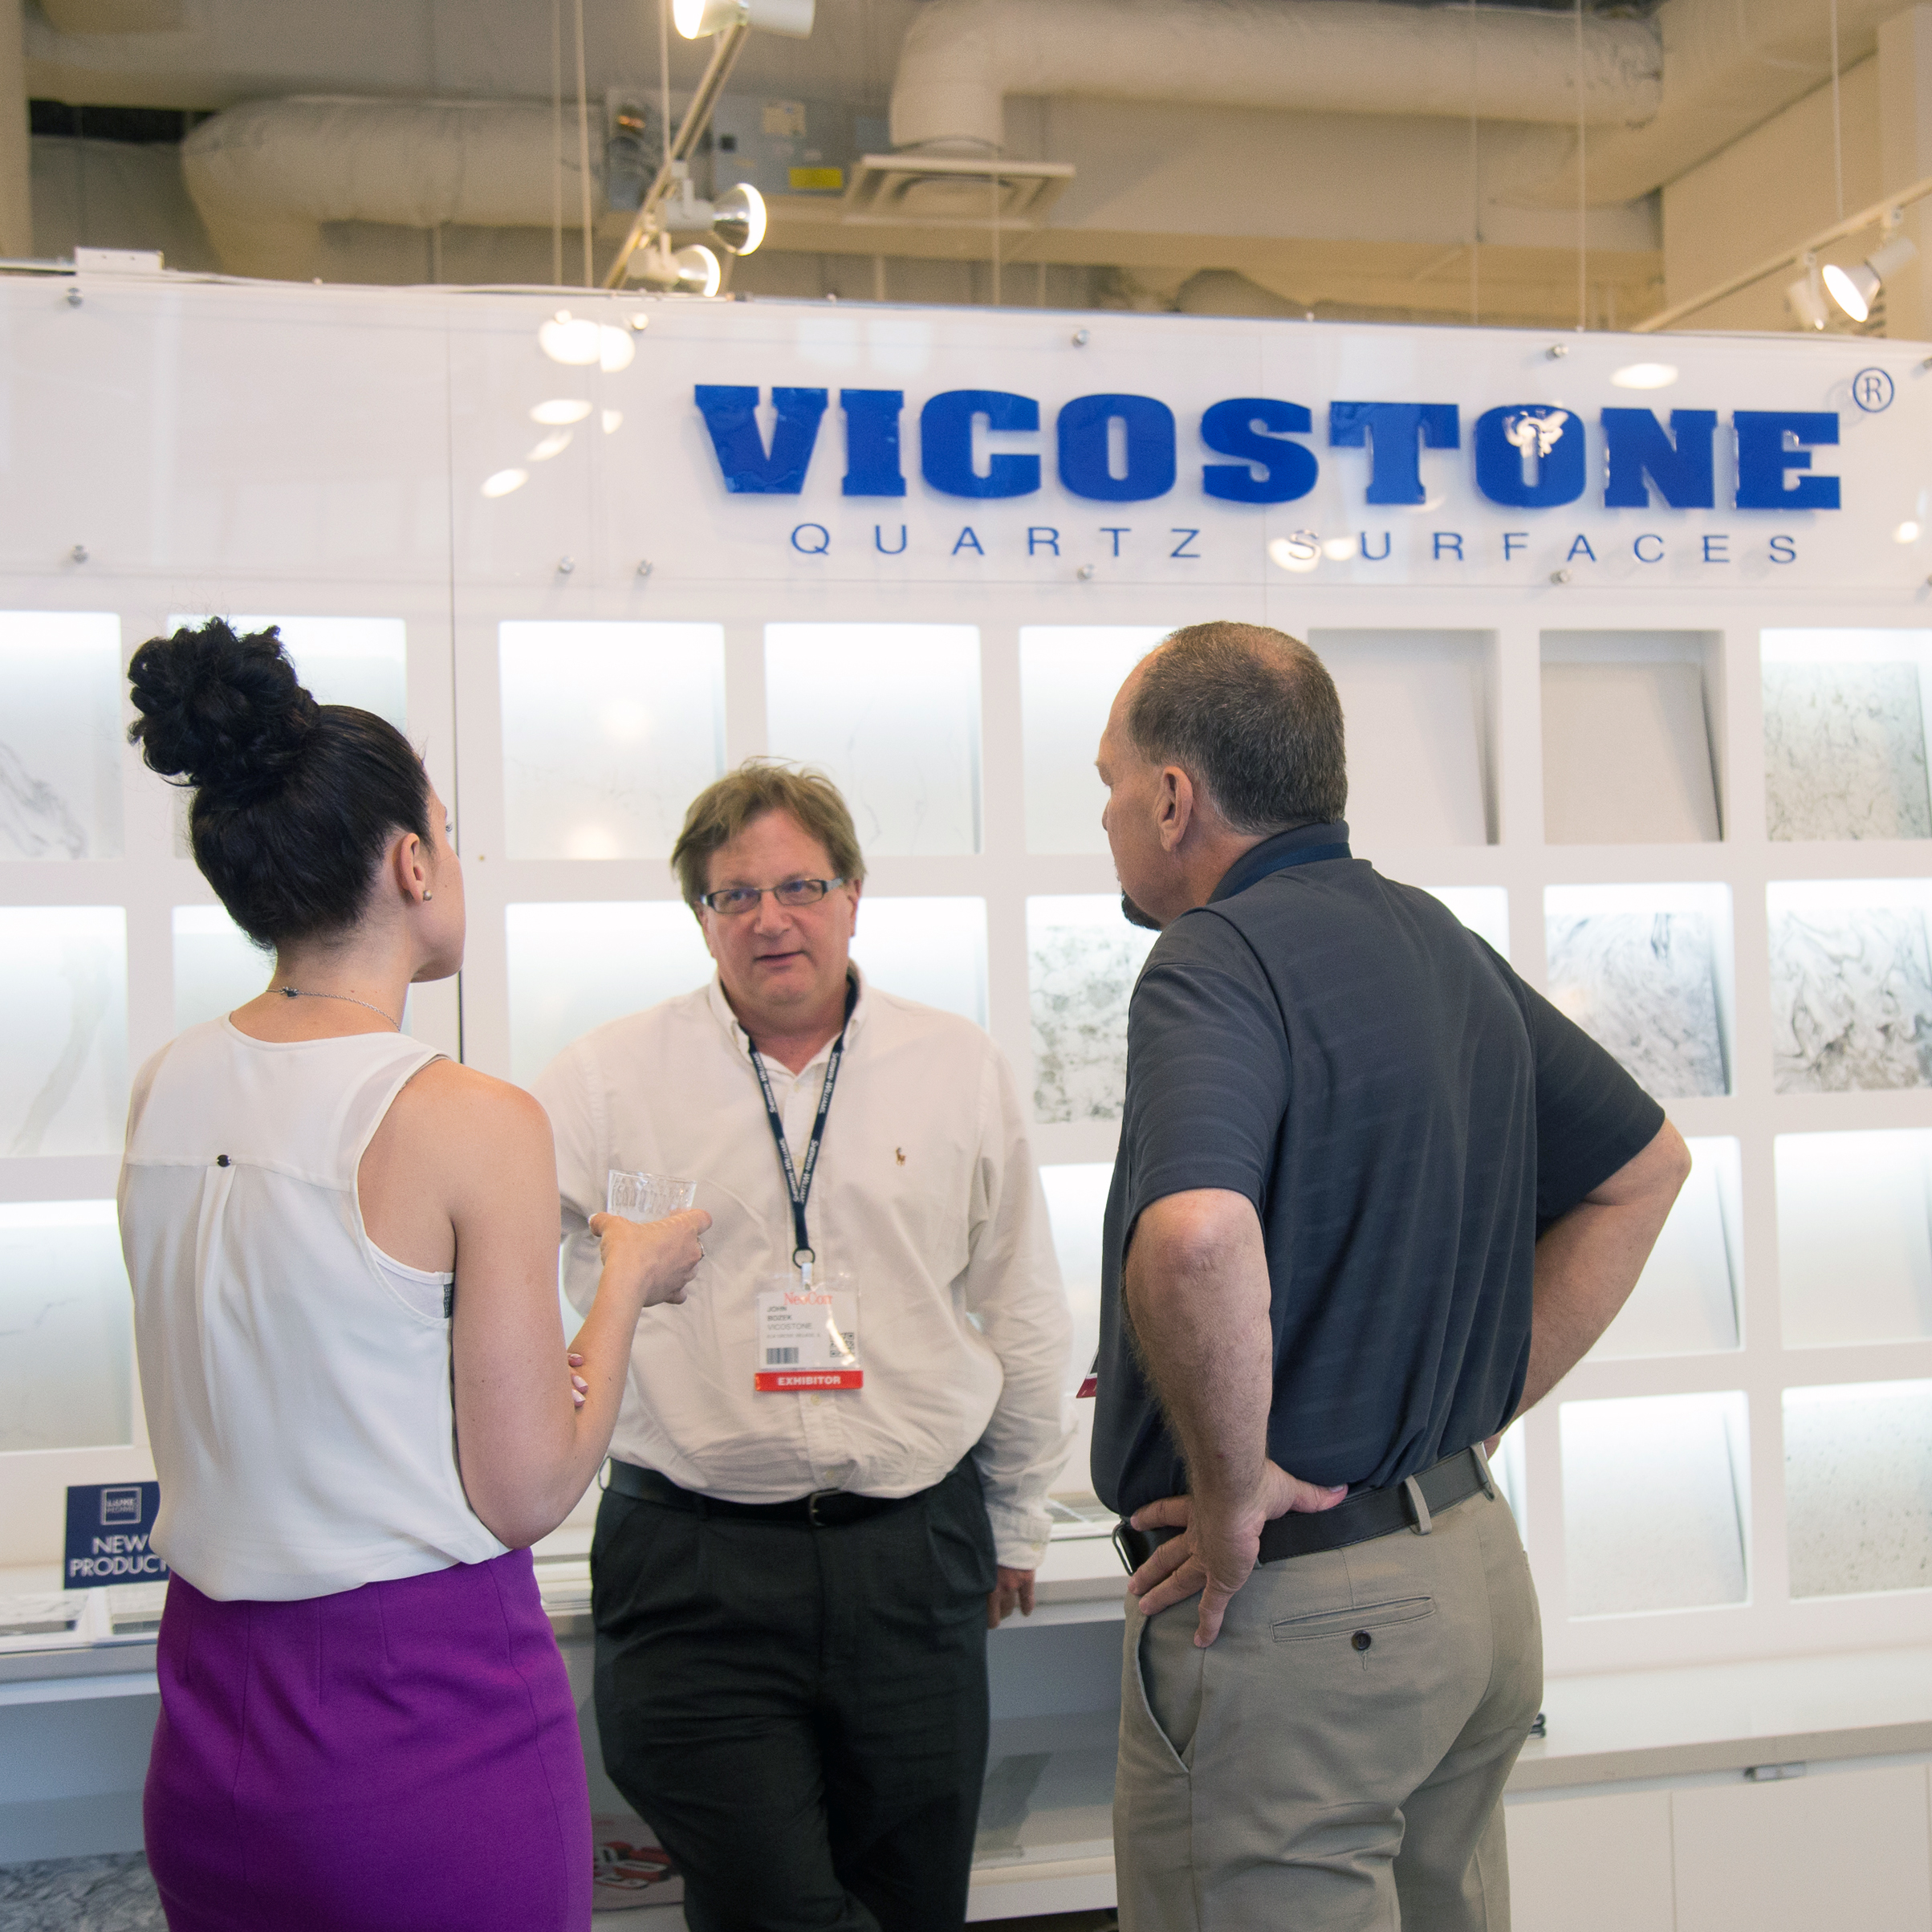 Vicostone's boutique is an open, collaborative space to view samples of our newest and most popular designs.